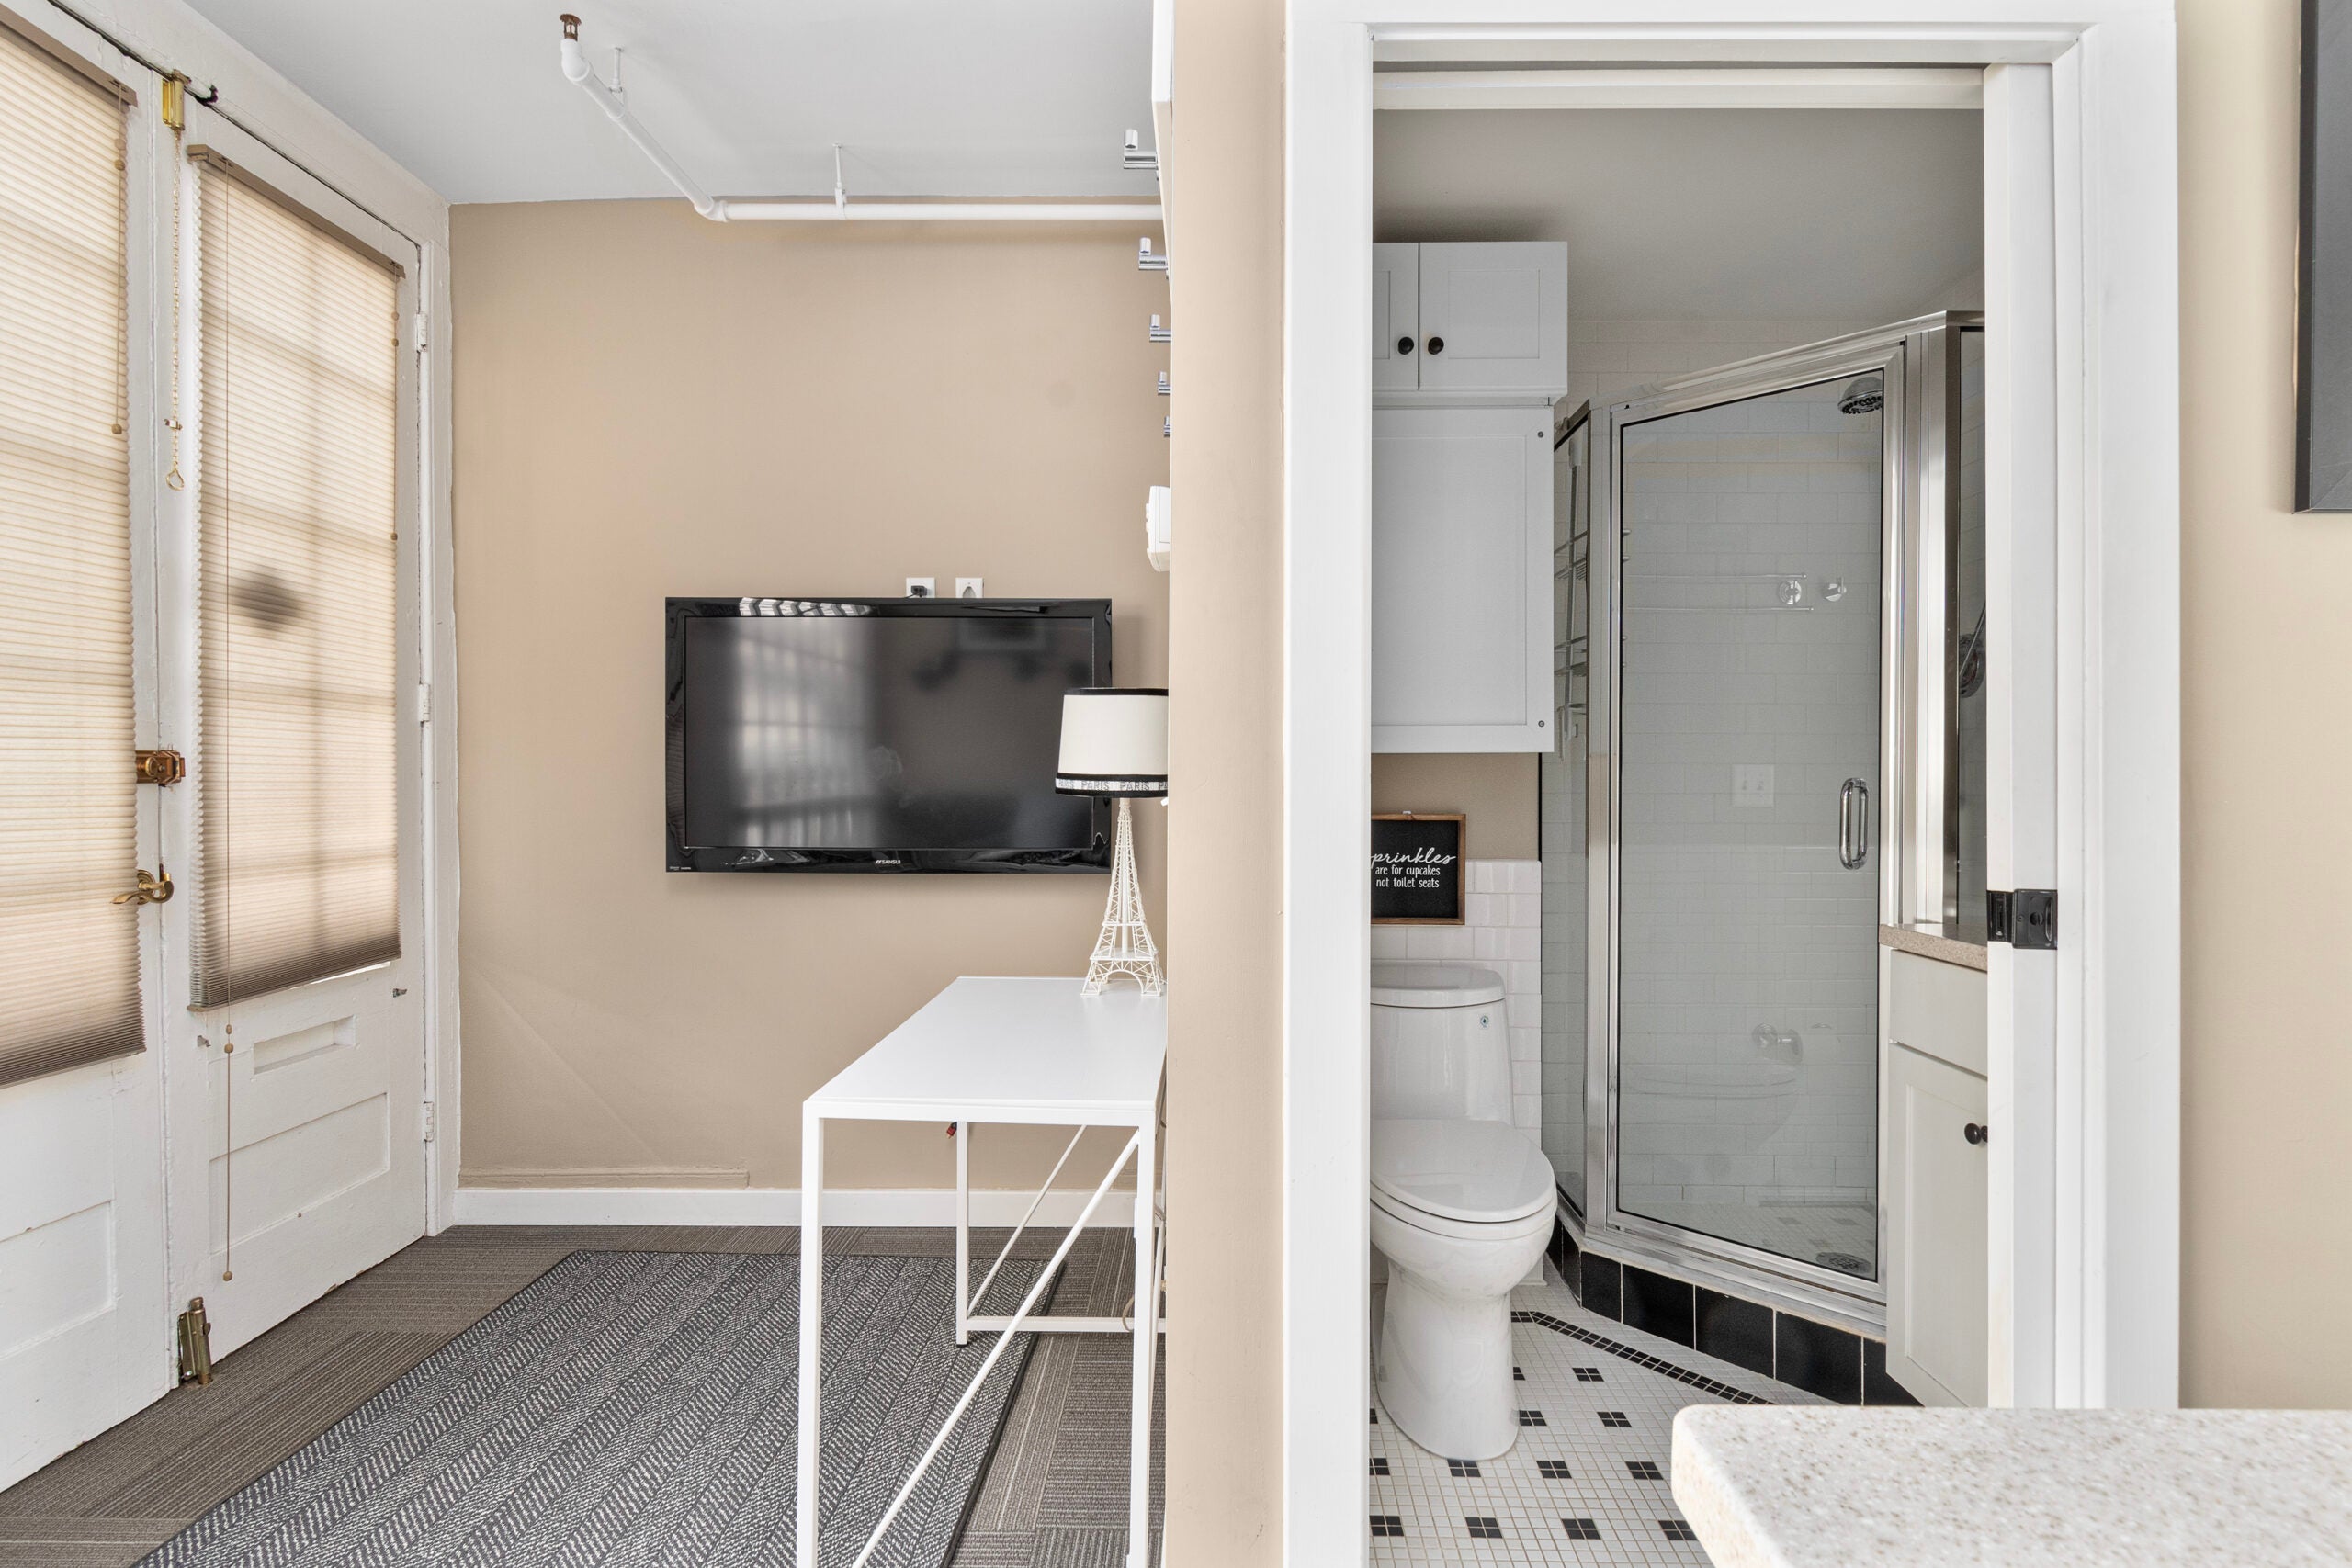 The bathroom offers a semi-frameless shower and above-toilet cabinetry for storage.